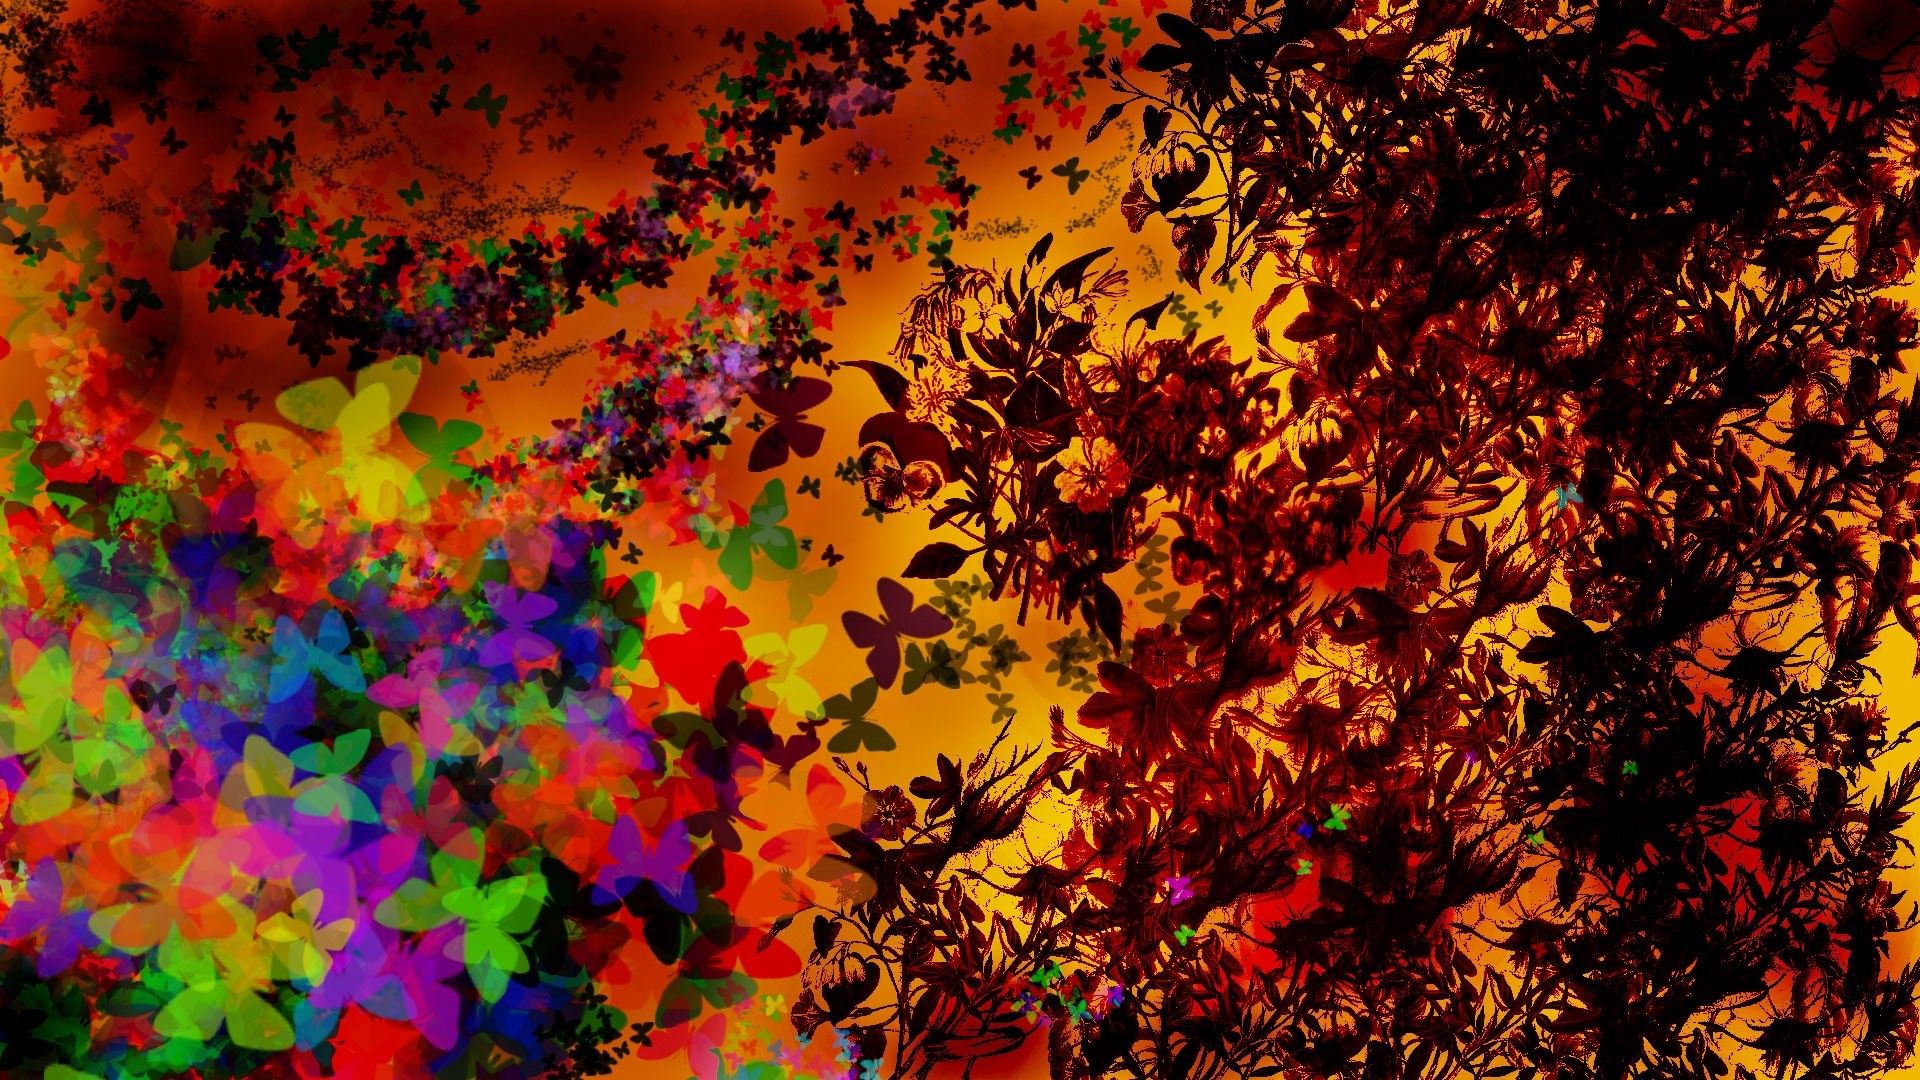 82653 download wallpaper butterflies, abstract, flowers, autumn, leaves, mood, creative screensavers and pictures for free